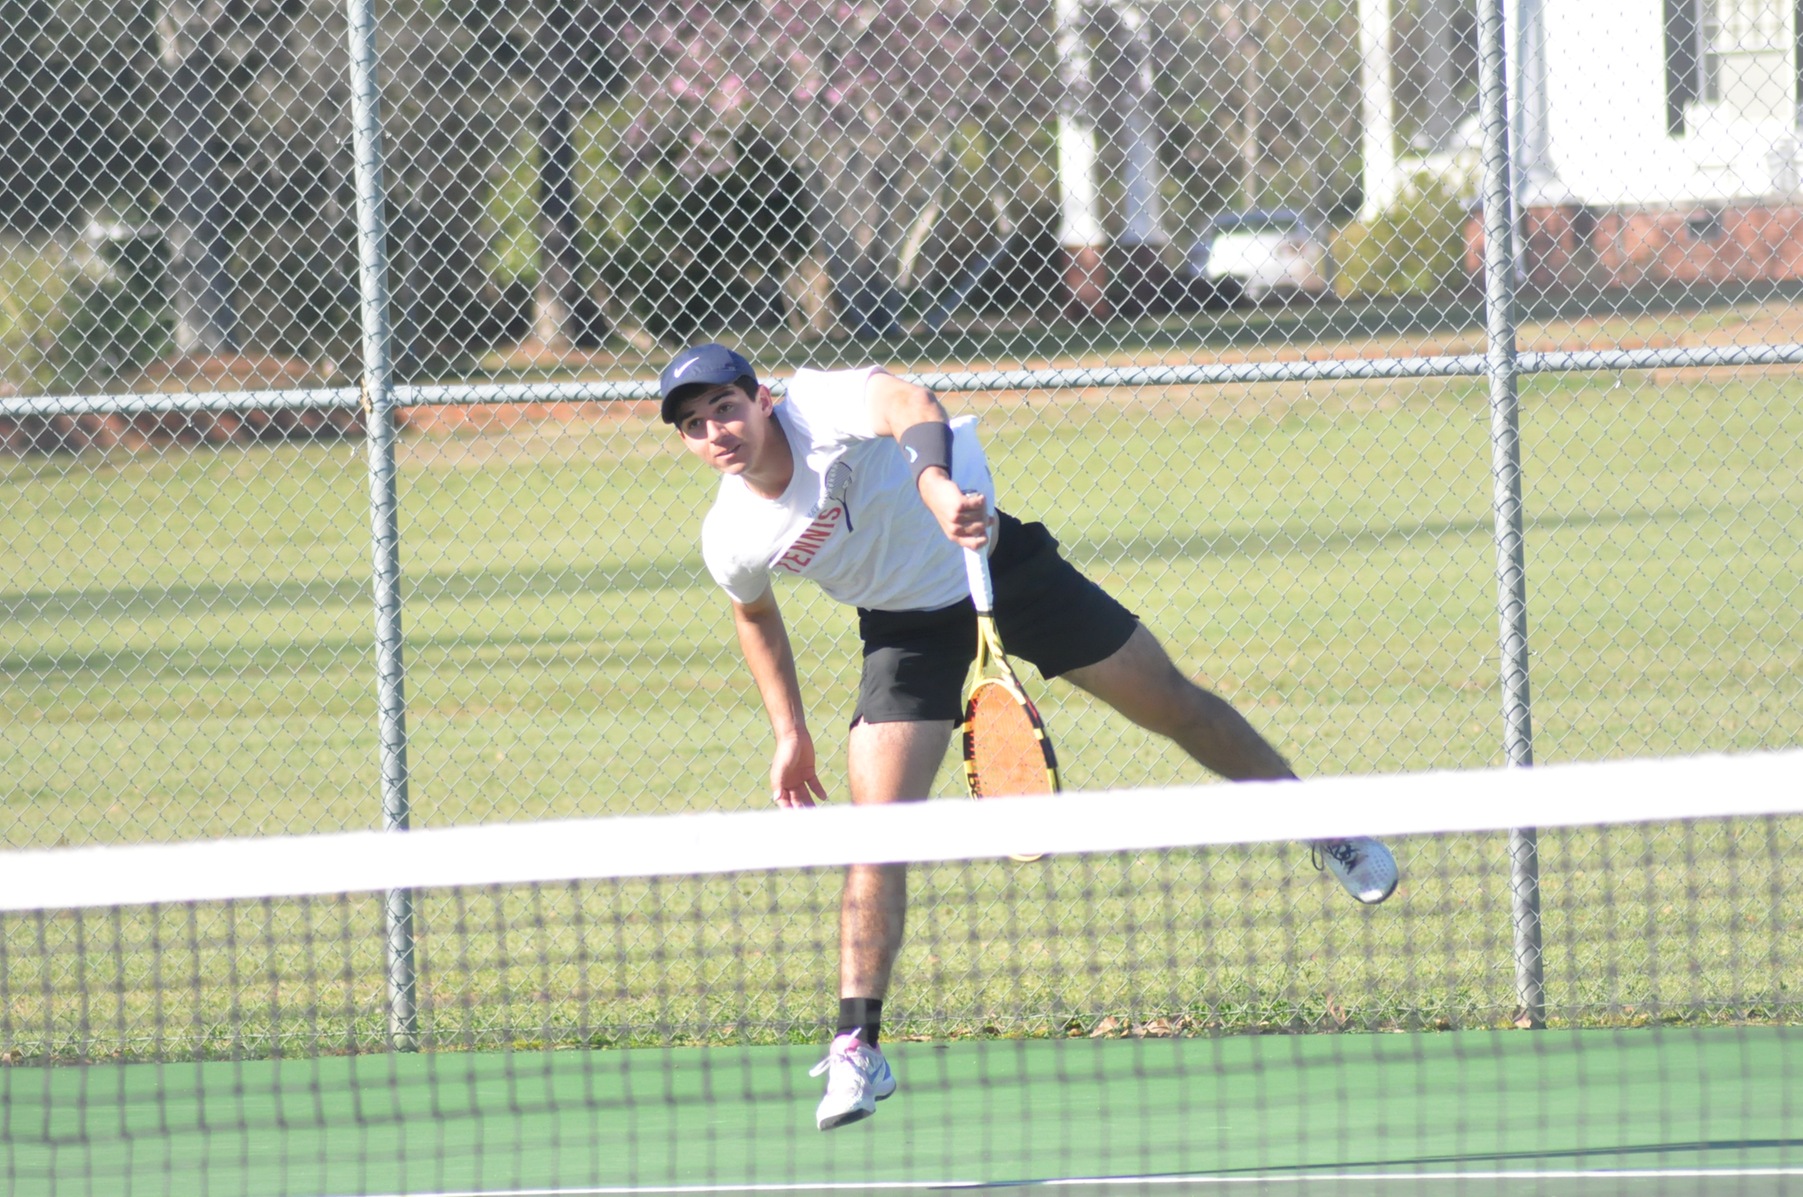 Tigers Drop First Match of Young Season in Men’s Tennis